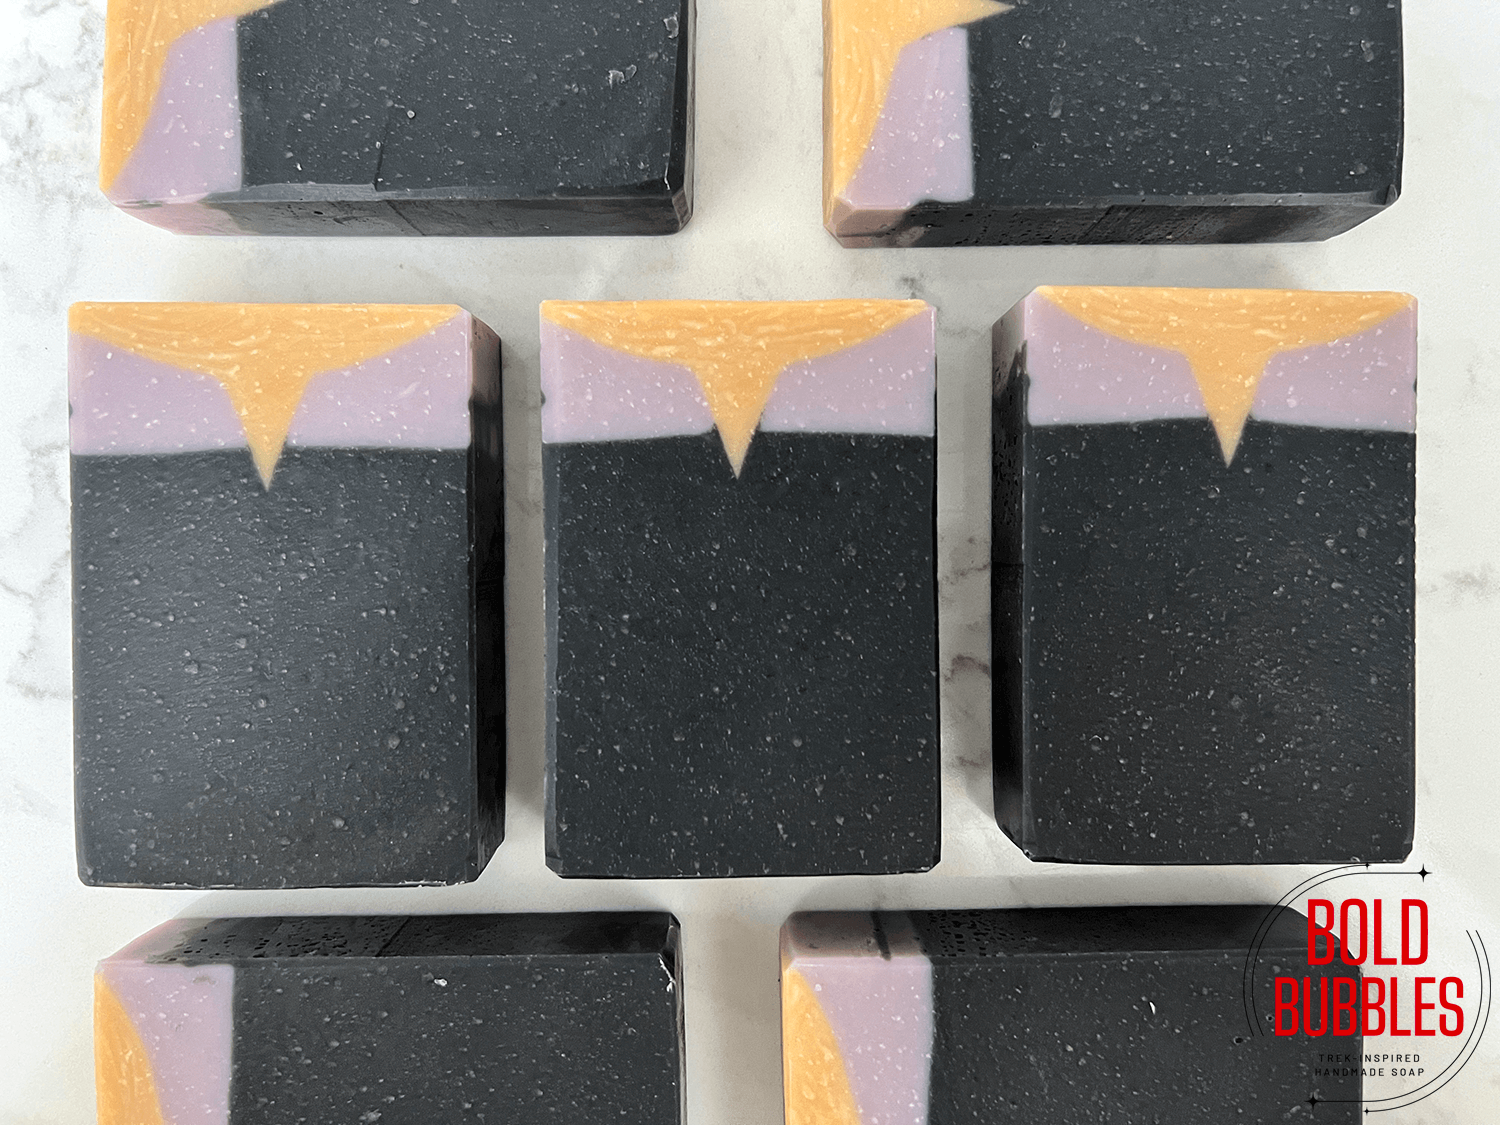 Soap designed in the late '90s-style Star Trek uniforms with grey on top and a yellow shirt underneath. This soap is inspired by Data, and it has a clean cotton scent that's called "Blue Skies."